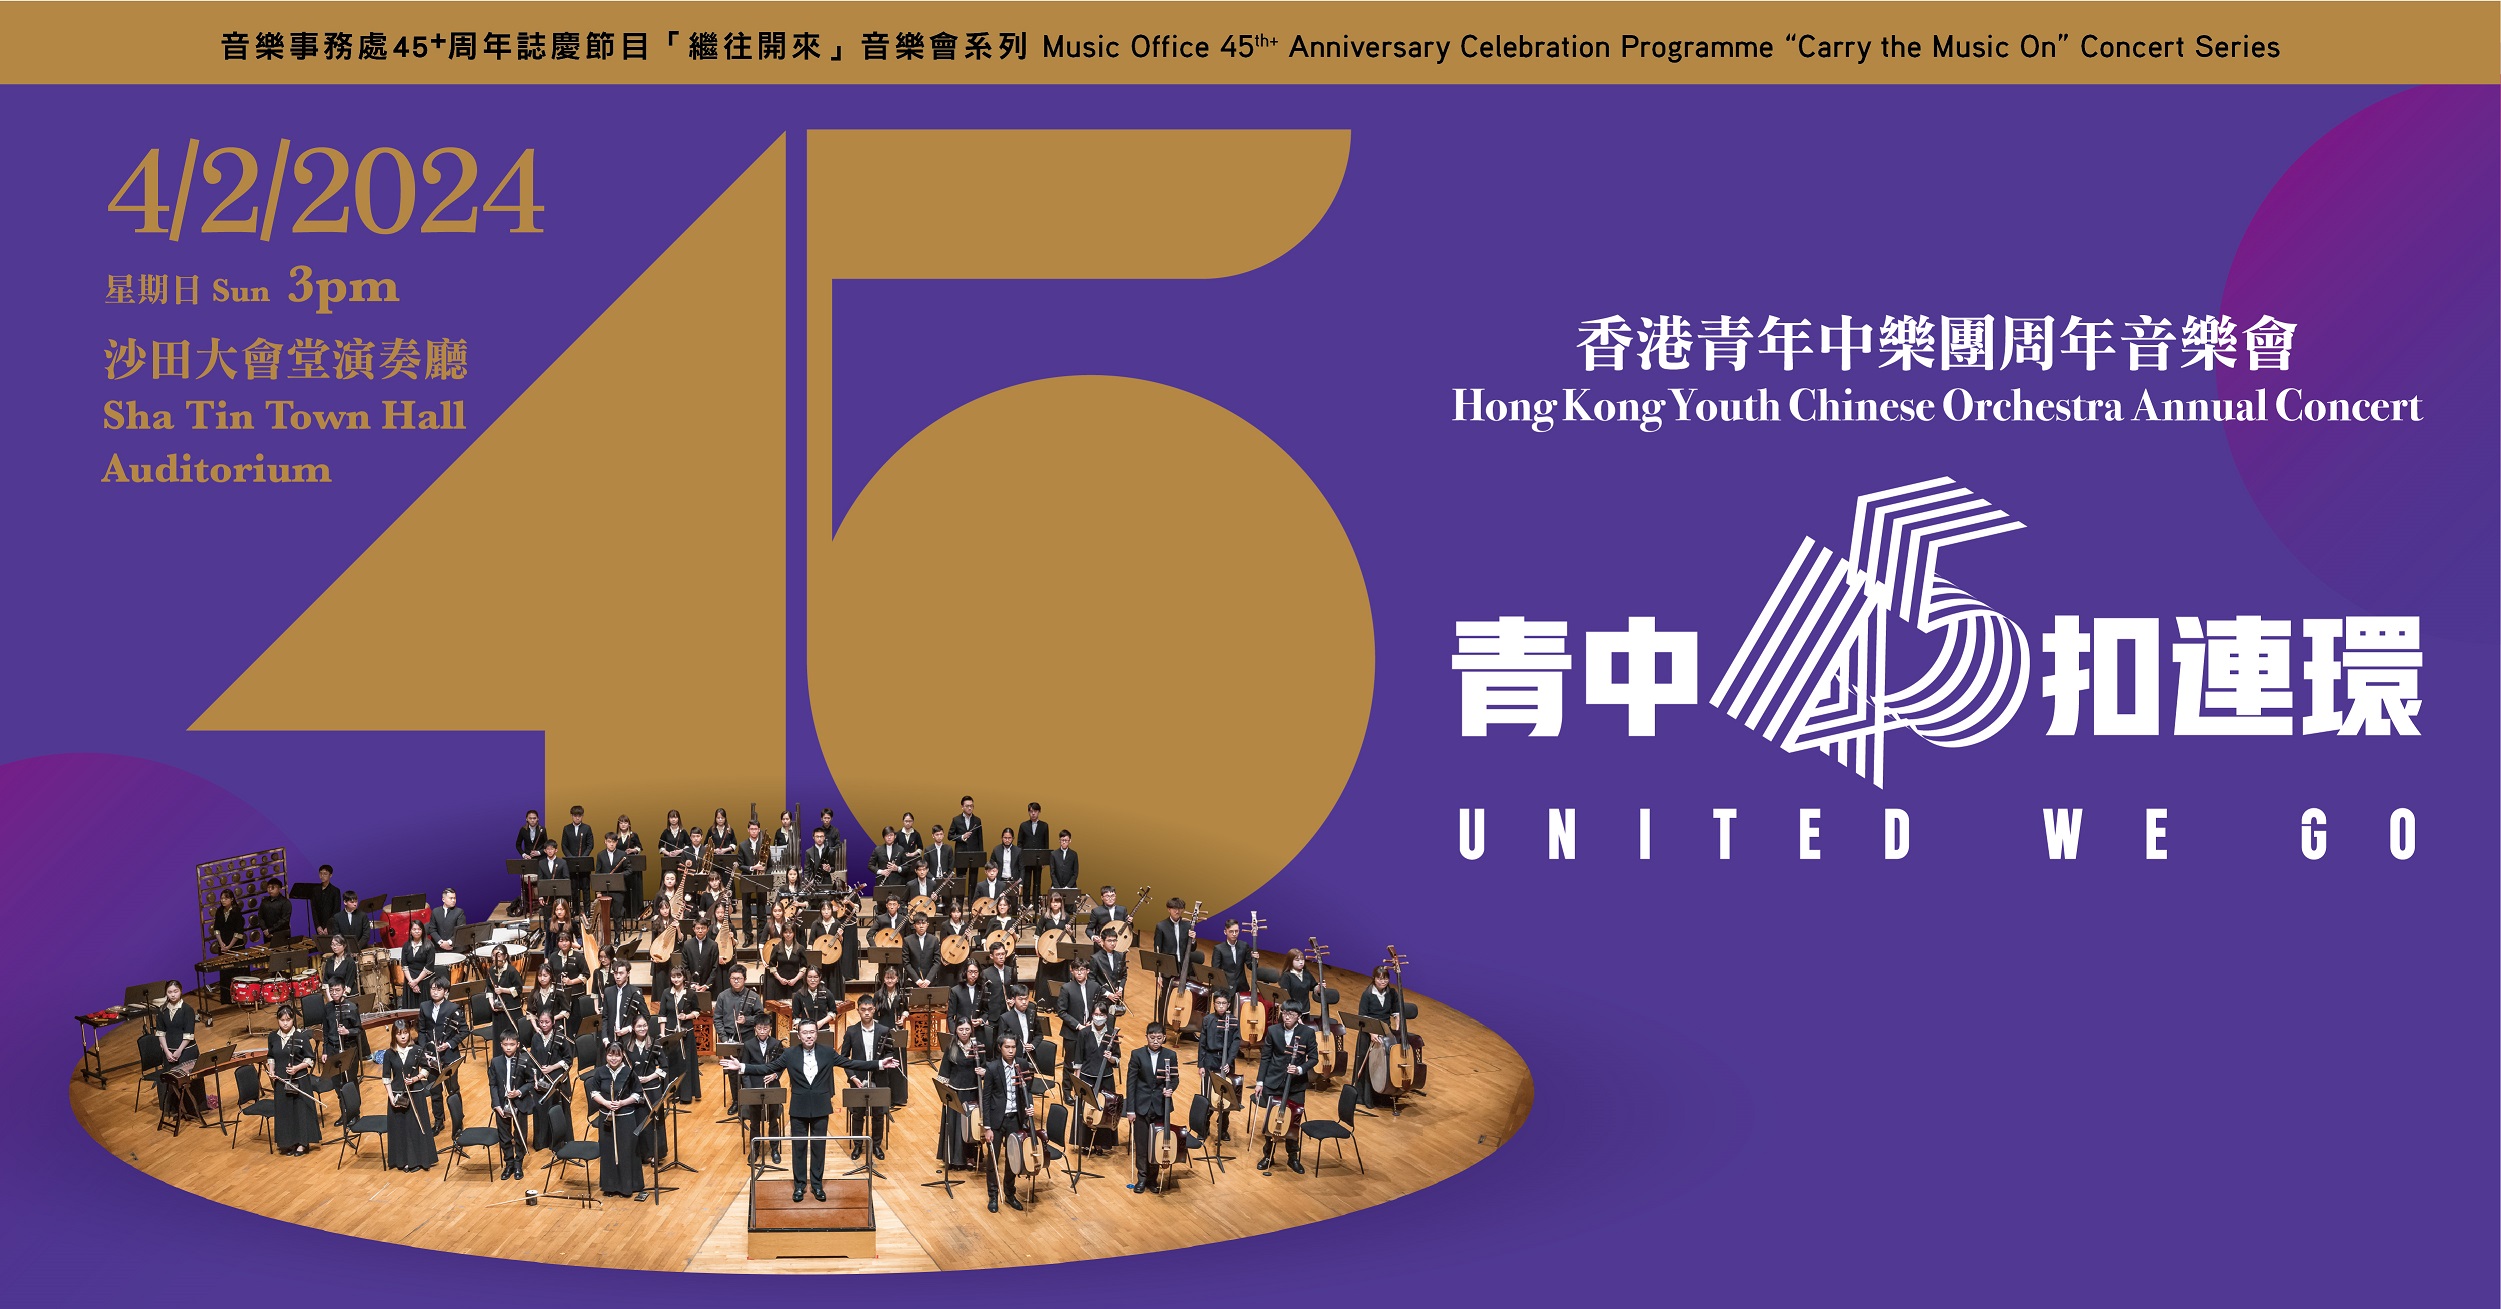 Hong Kong Youth Chinese Orchestra Annual Concert - United We Go 